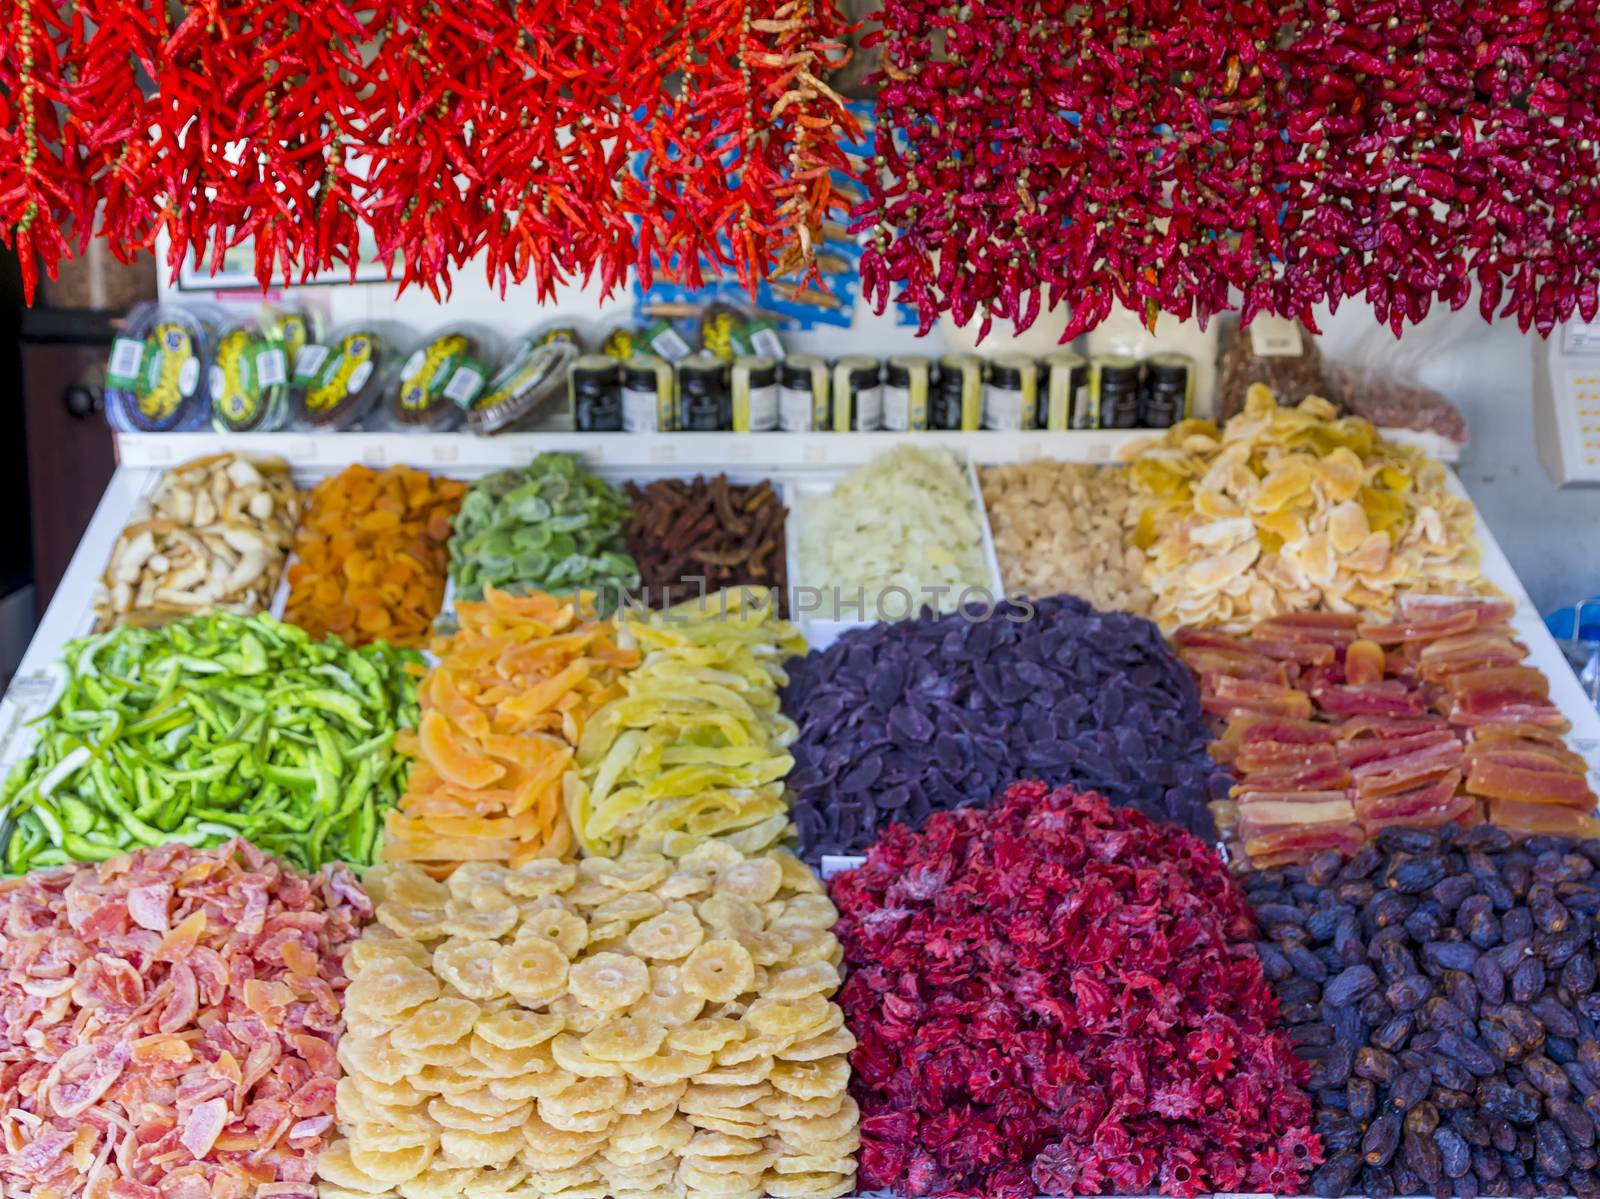 Chillies and paprika hanging over vegetables and dried fruit at a market stall.